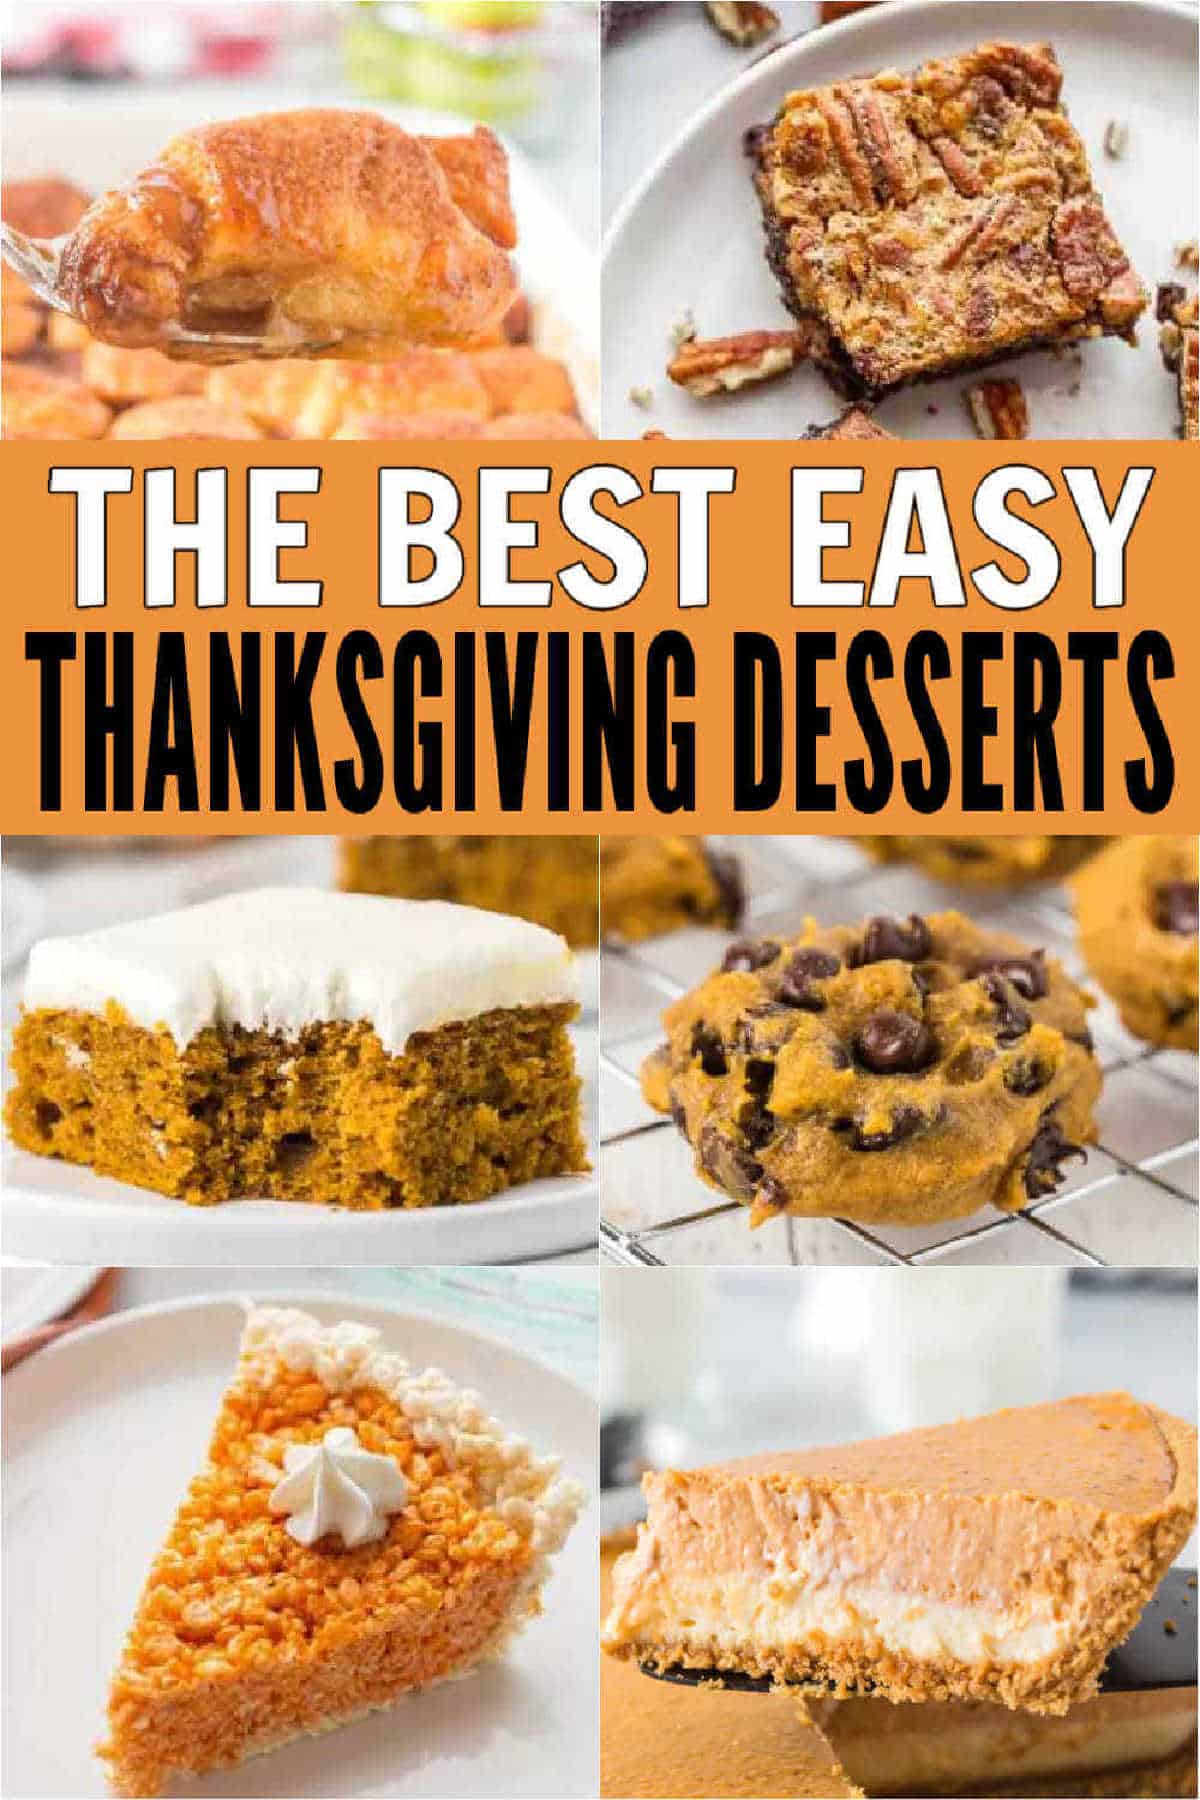 Everyone will love these delicious Thanksgiving dessert recipes. From cake and cookies to pie and more, these easy Thanksgiving desserts will be a hit with the adults and with kids at your Thanksgiving celebration. These quick and easy desserts are great to make ahead too! #eatingonadime #thanksgivingdesserts #easydessertrecipes #easydesserts 